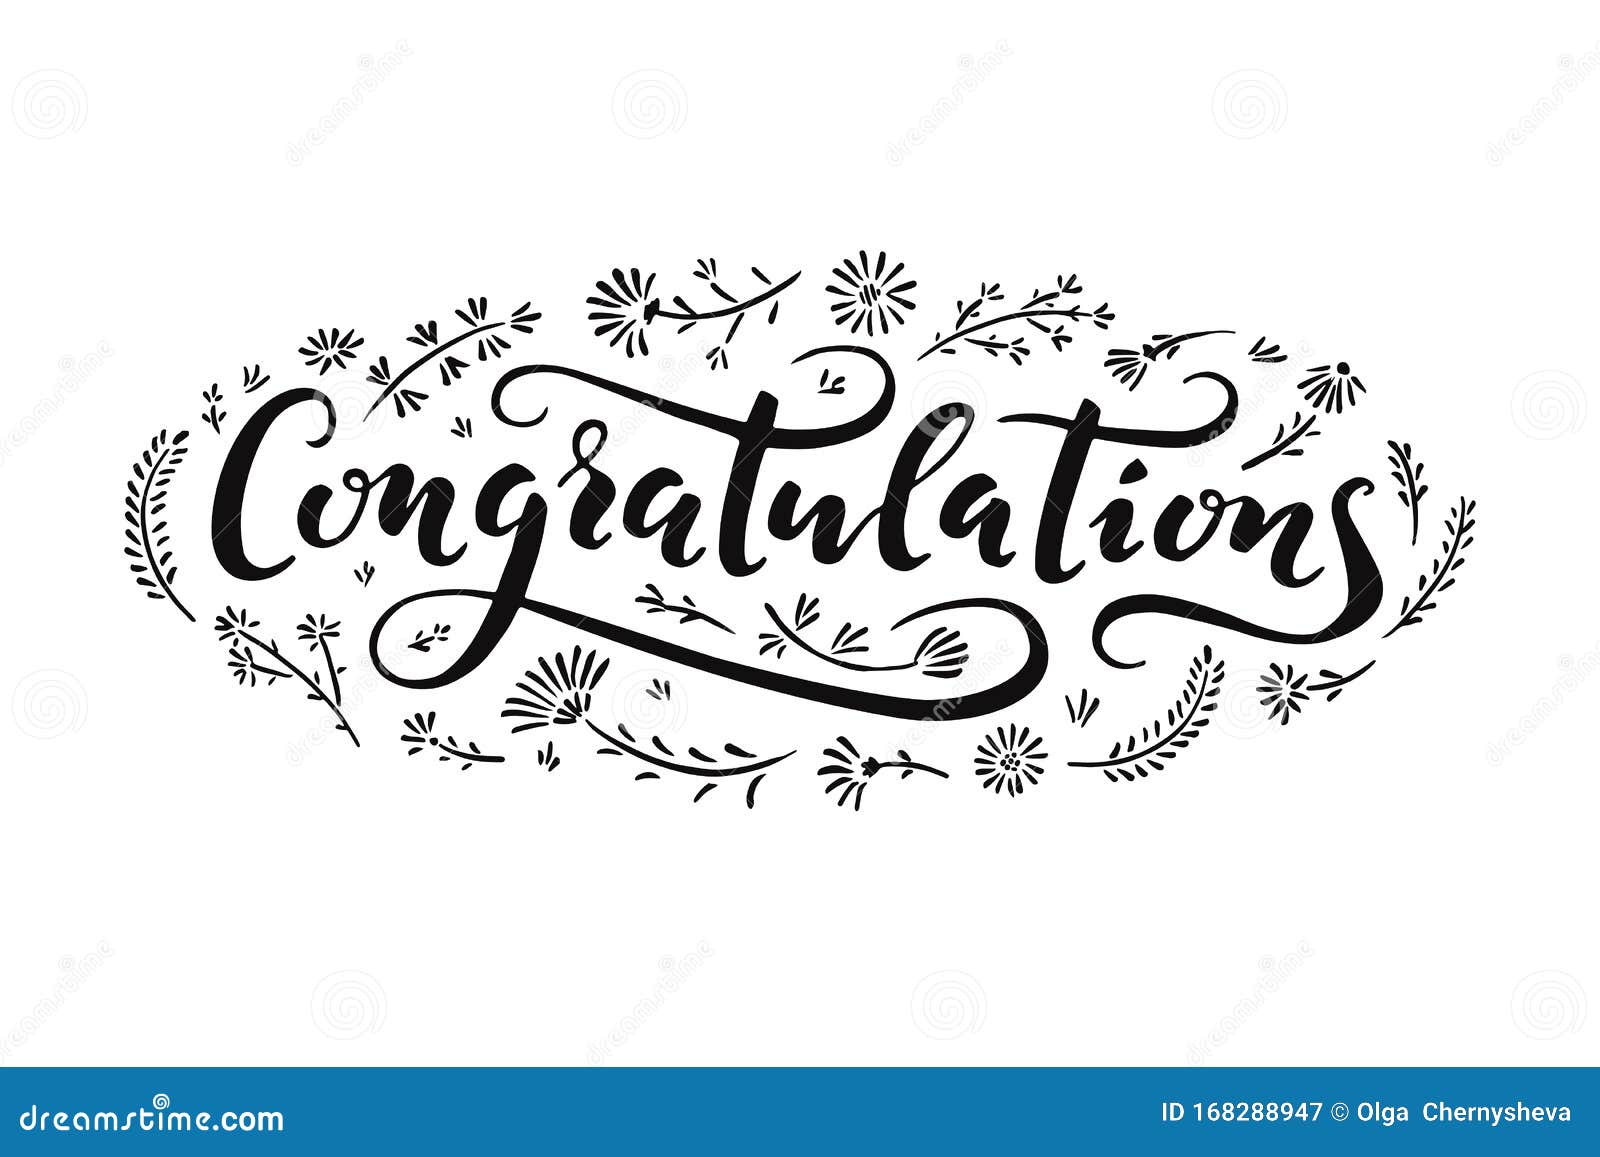 Congratulations Lettering Handwriting Illustration For Postcards Stock